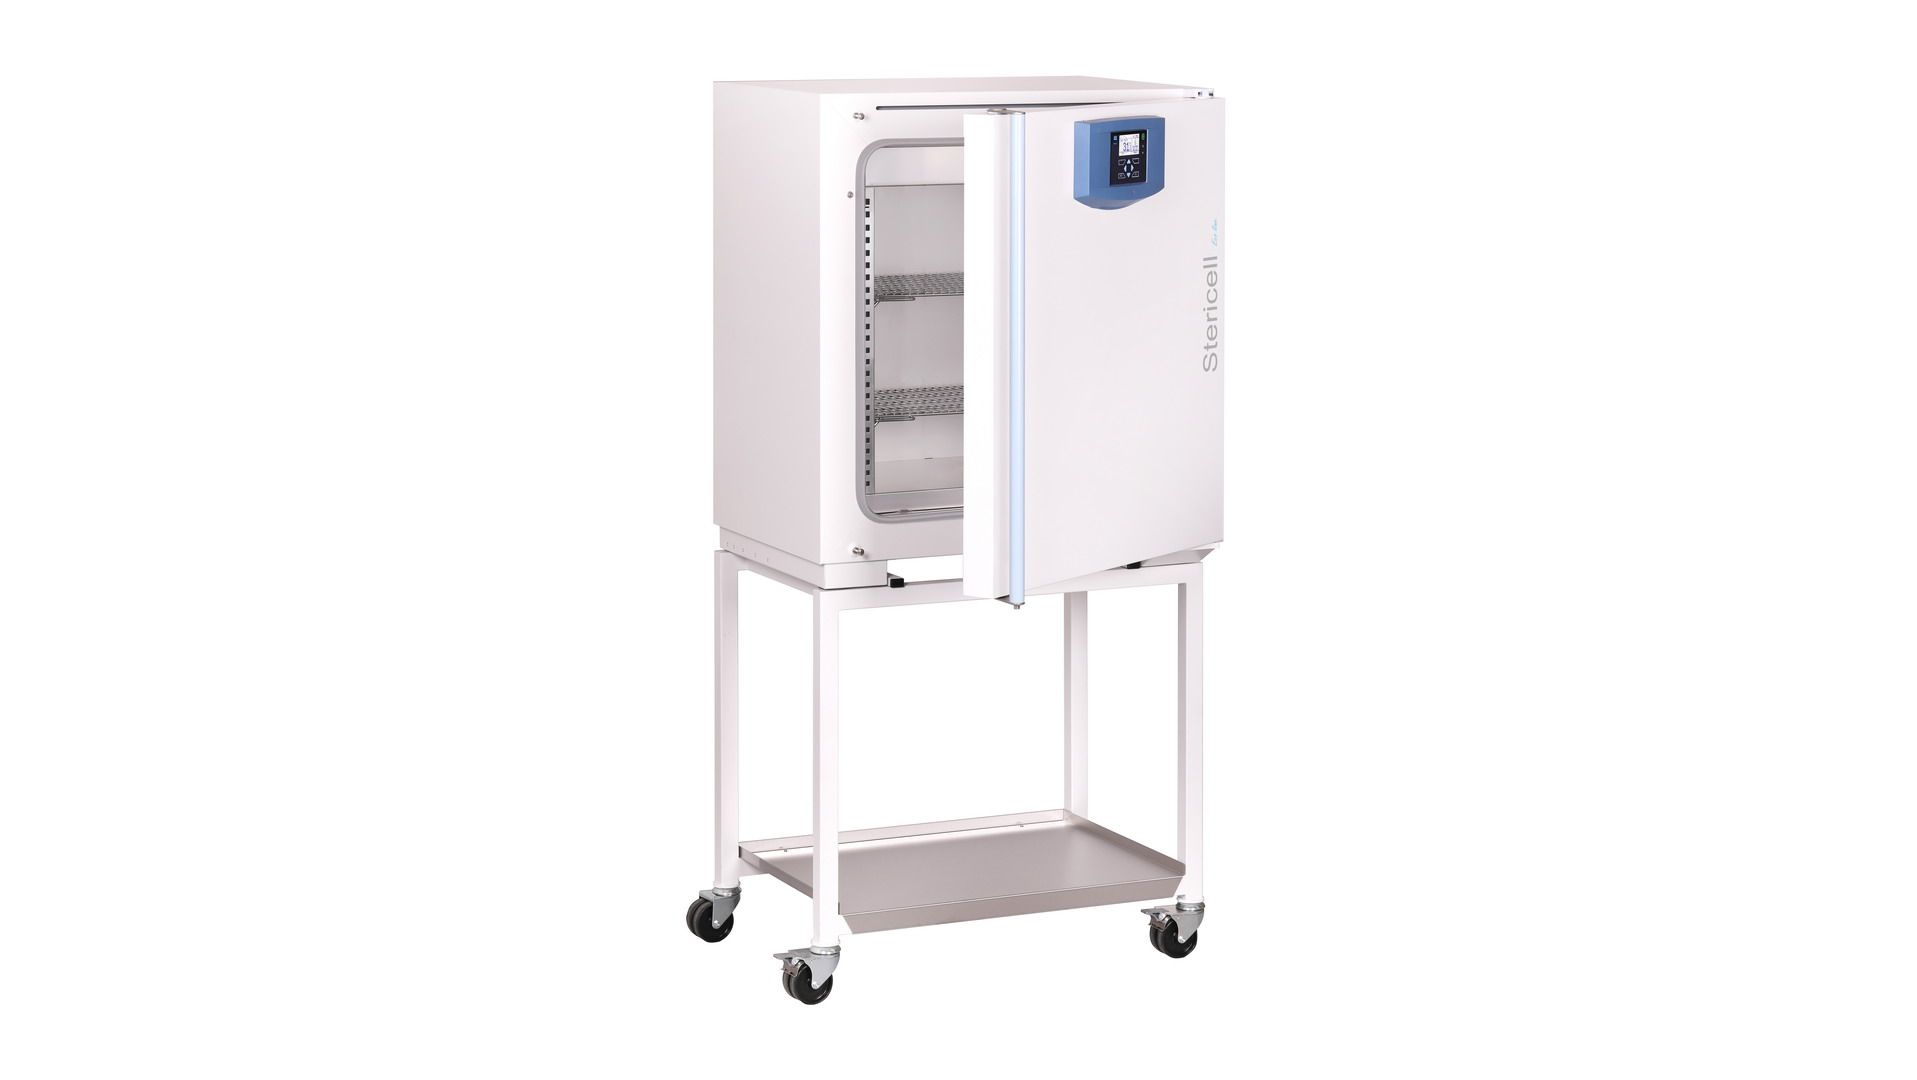 Stericell ECO Sterilization Dry Heat Oven from BMT USA